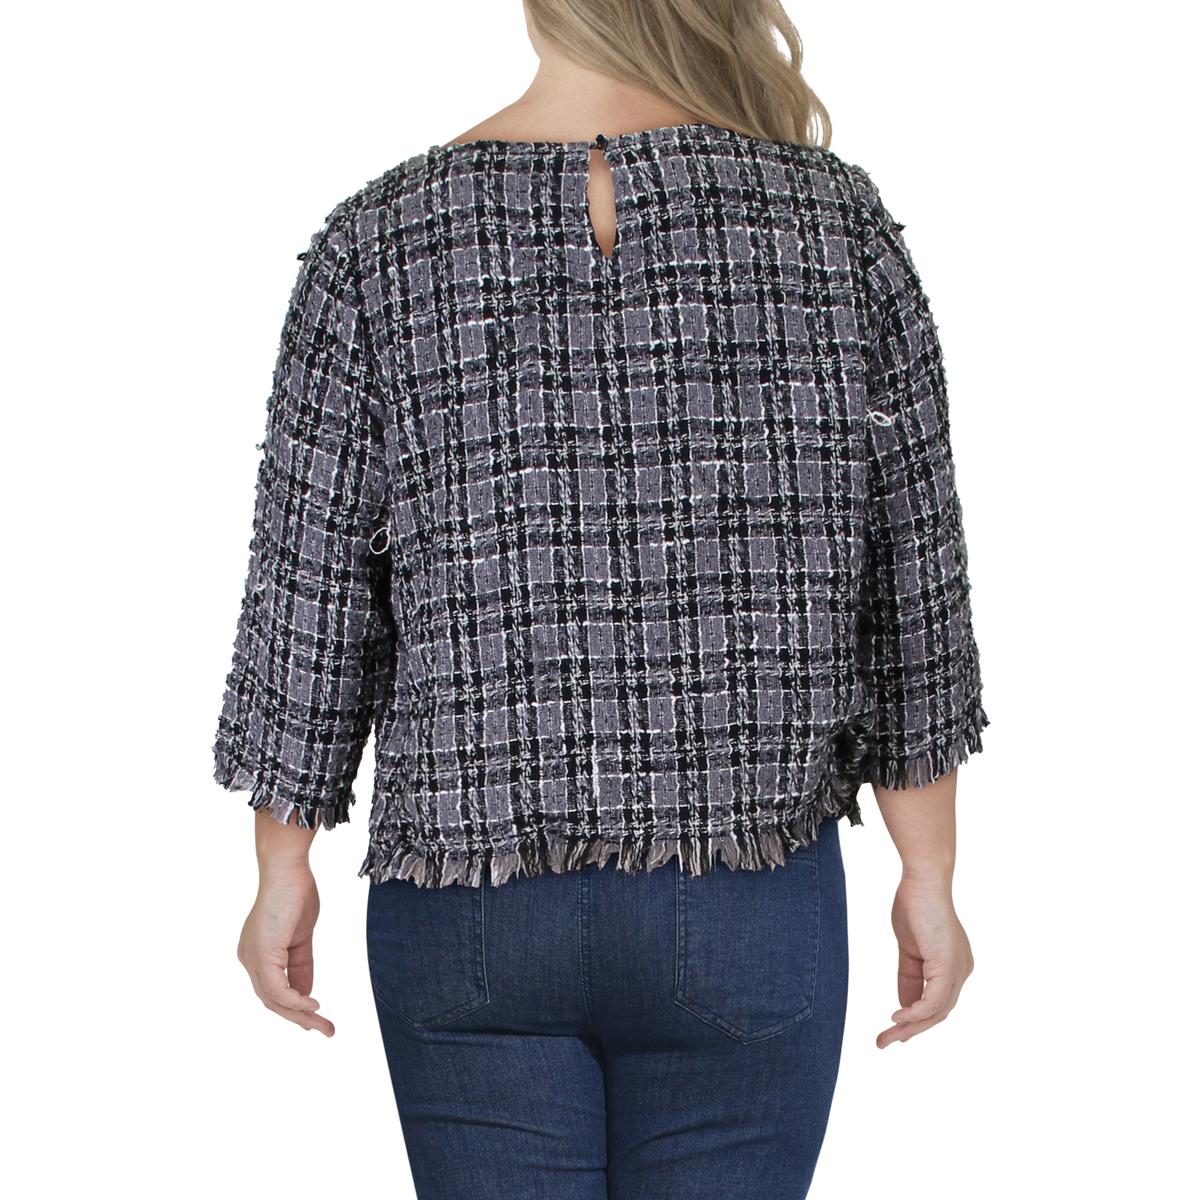 Anne Klein Womens Gray Tweed Fringed Popover Top Blouse L BHFO 6649 | eBay